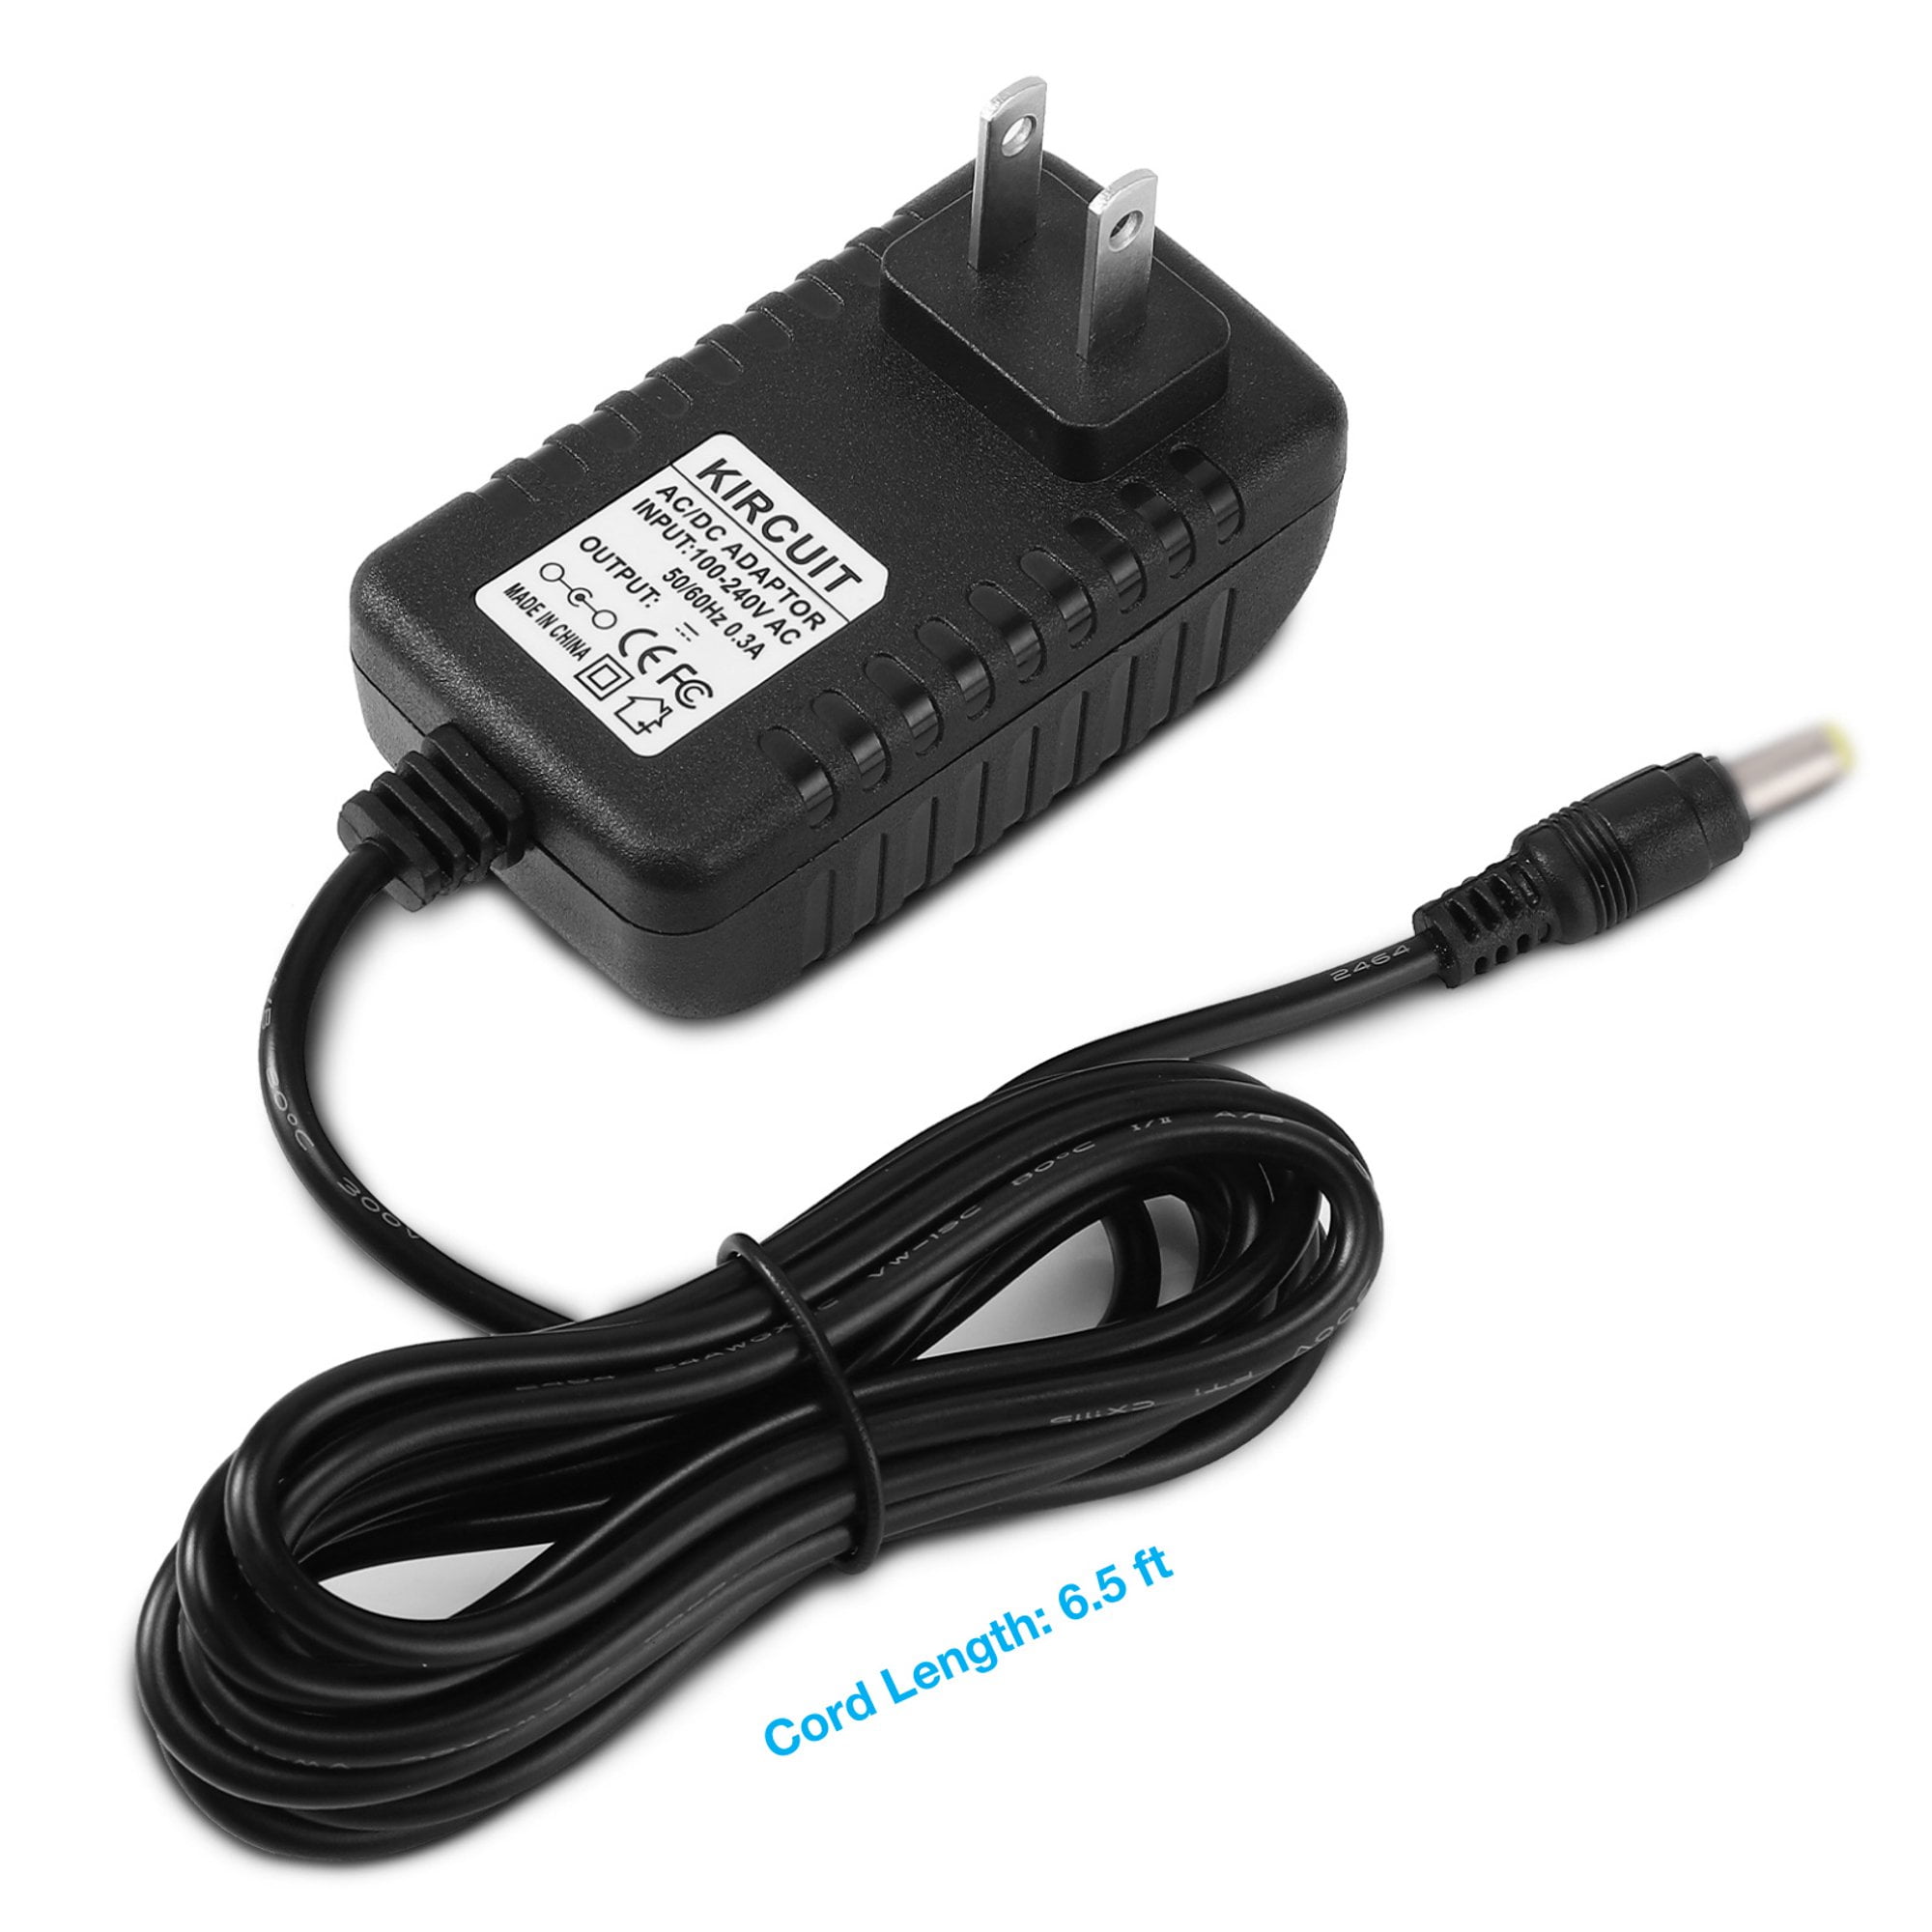 AC Adapter for Black & Decker 588654-05 Power Supply Home Wall